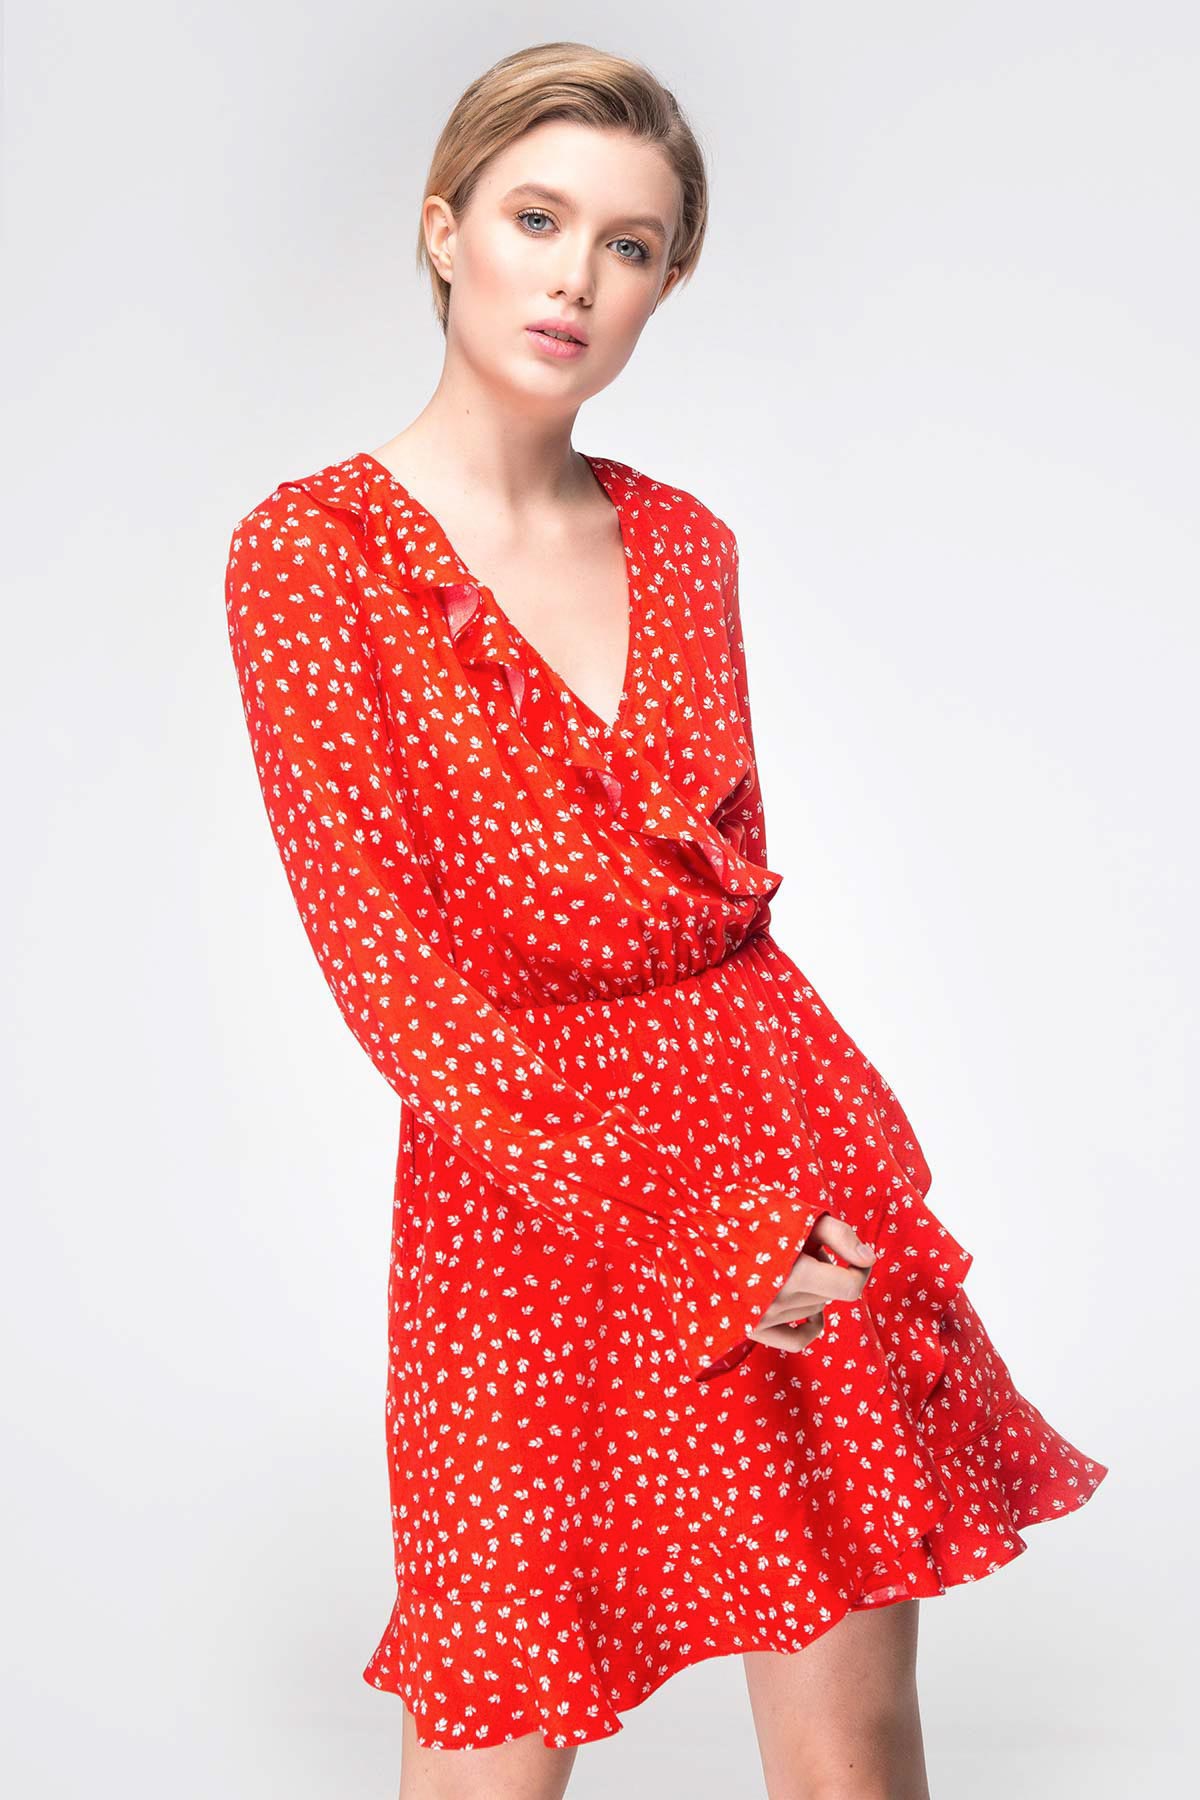 Red dress with flounces and floral print, photo 7